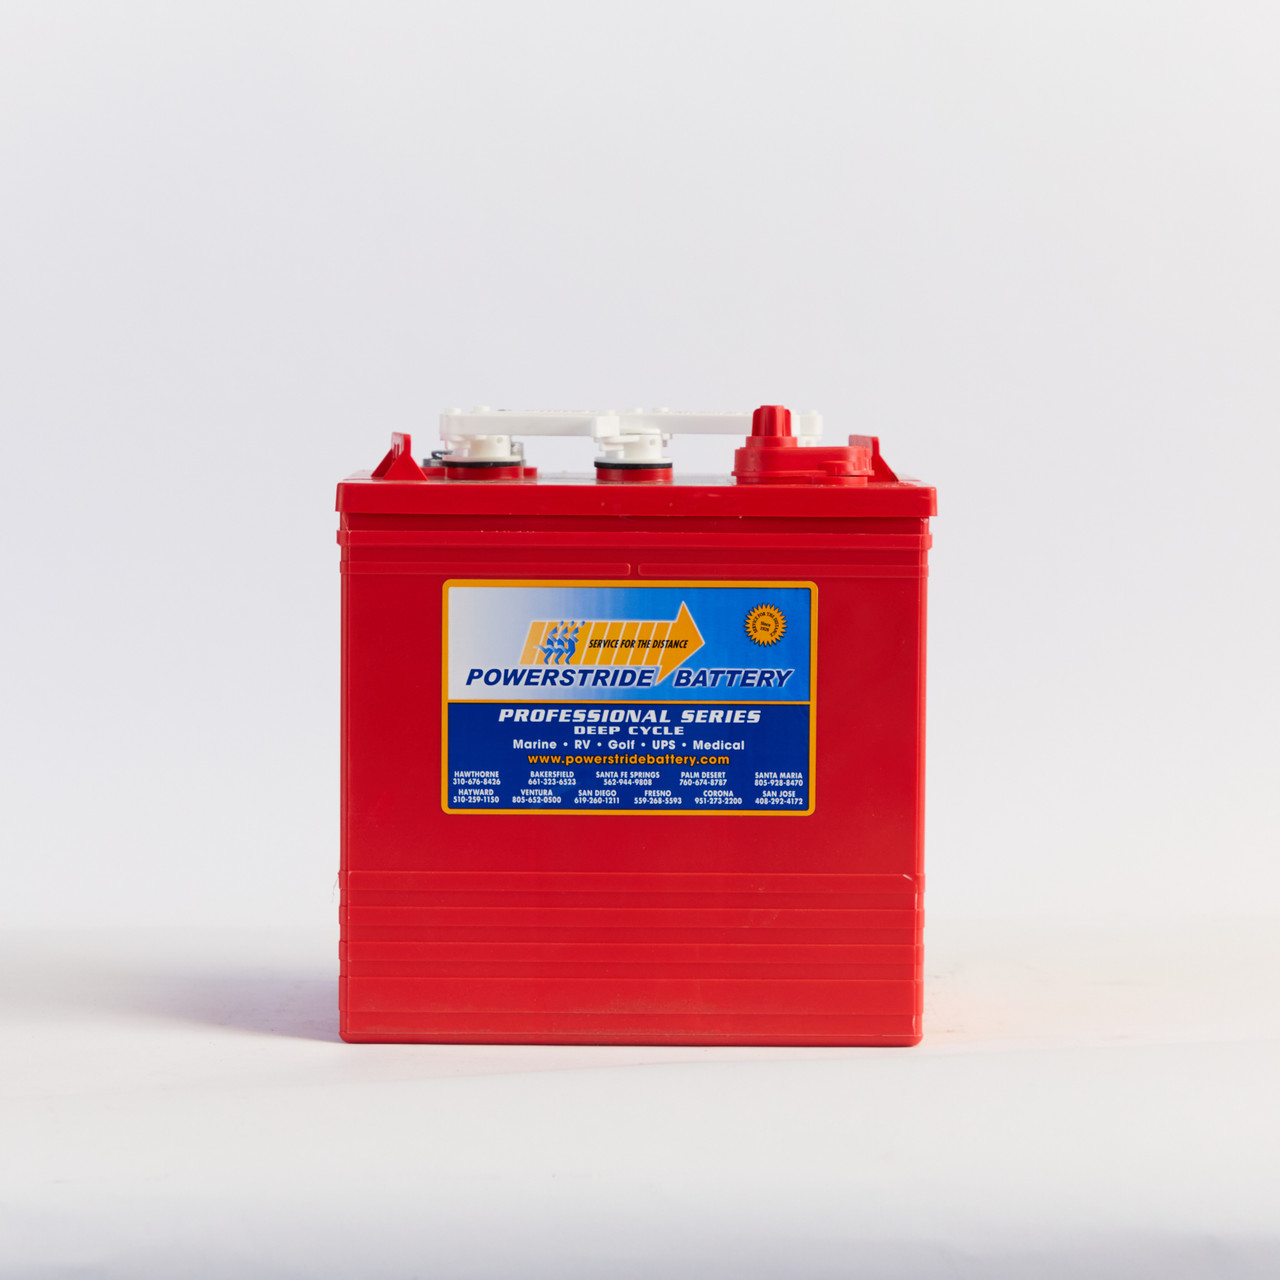 Powerstride - US 2200 XC2 - 6 Volt Deep Cycle Battery -Golf Cart Group Size